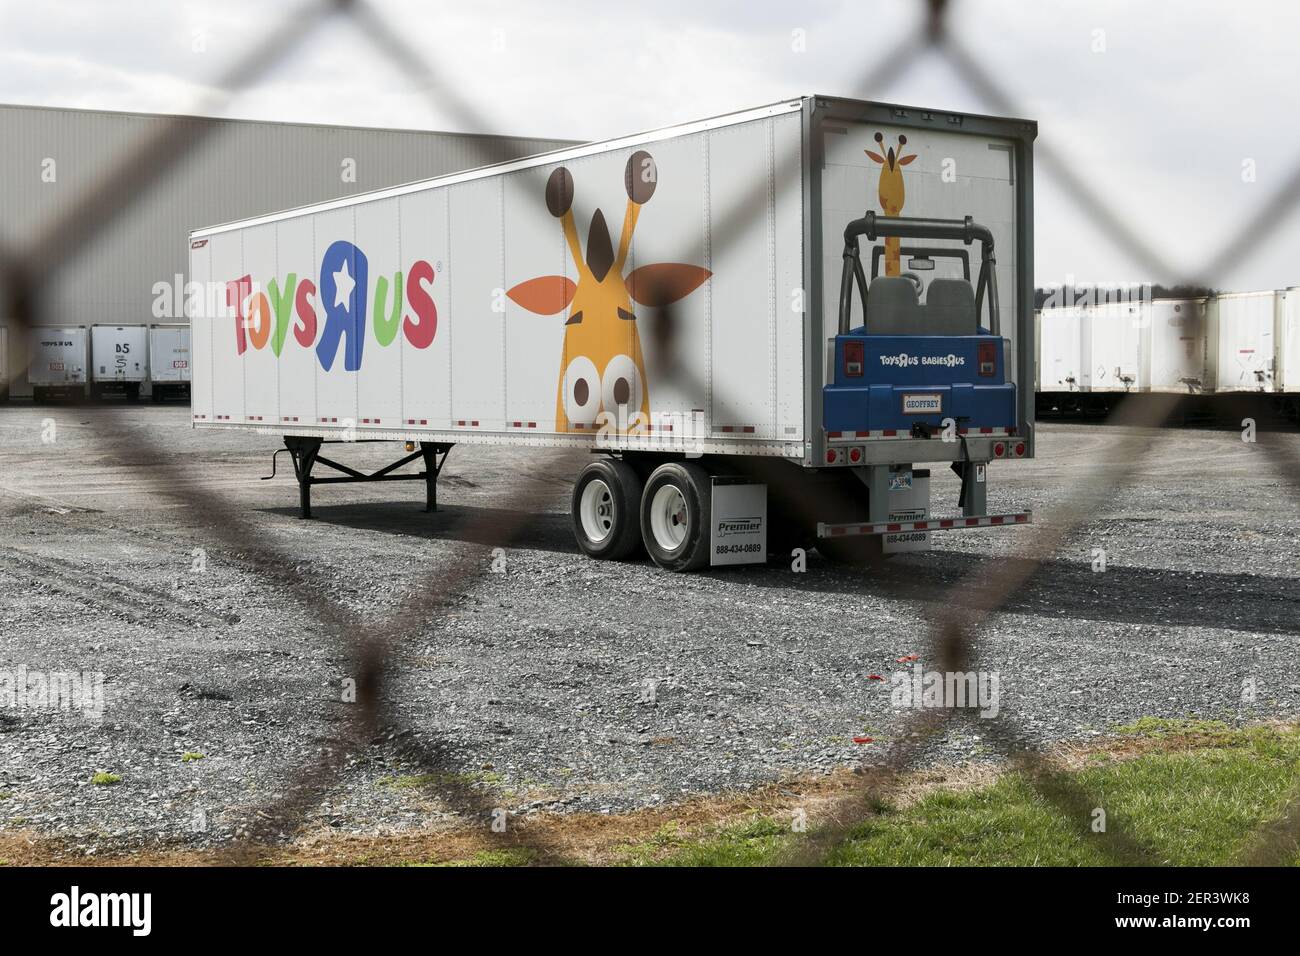 Semi-truck trailers outside of a Toys "R" Us distribution center in  Frederick, Maryland on April 5, 2018. The toy retailer, which has struggled  under a heavy debt load, announced its bankruptcy and